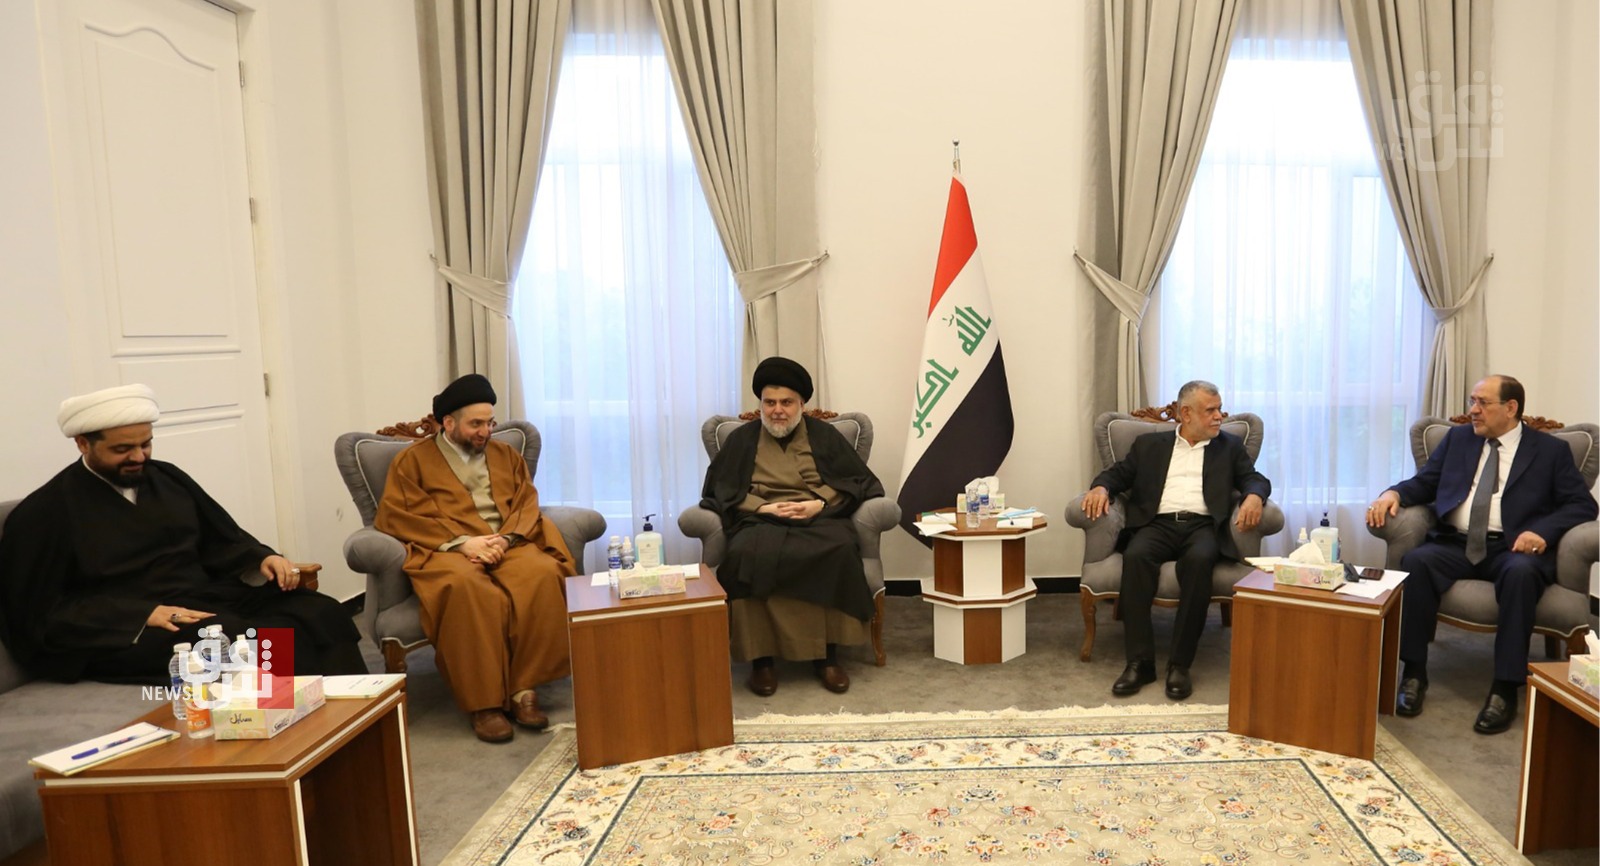 Al-Sadr informs Iran and the leaders of the framework - either a government without al-Maliki or the opposition